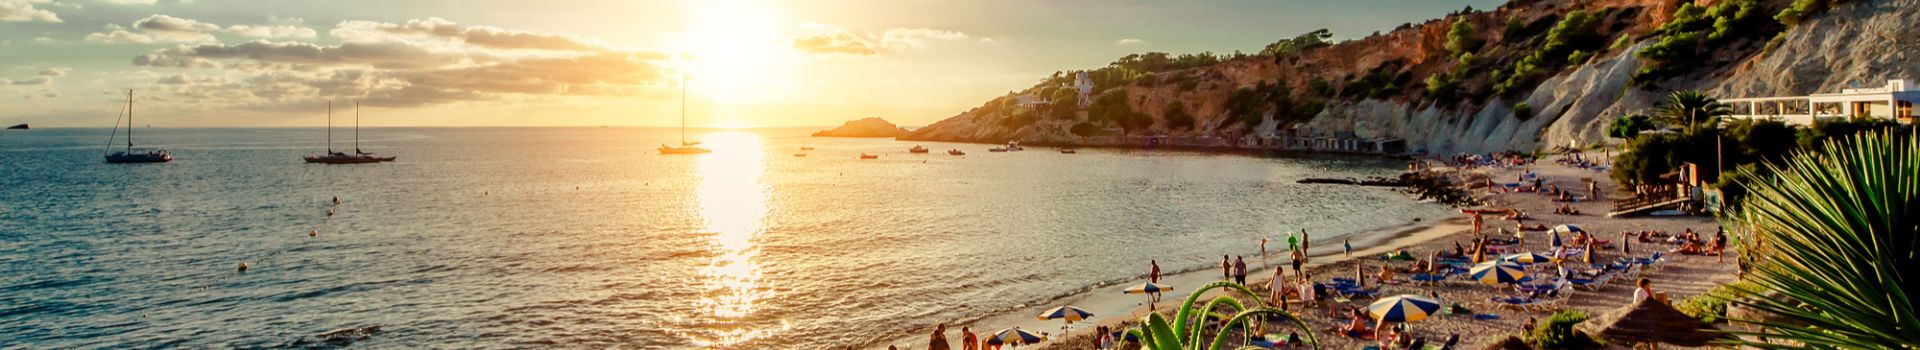 All inclusive family holidays to Ibiza with Cassidy Travel